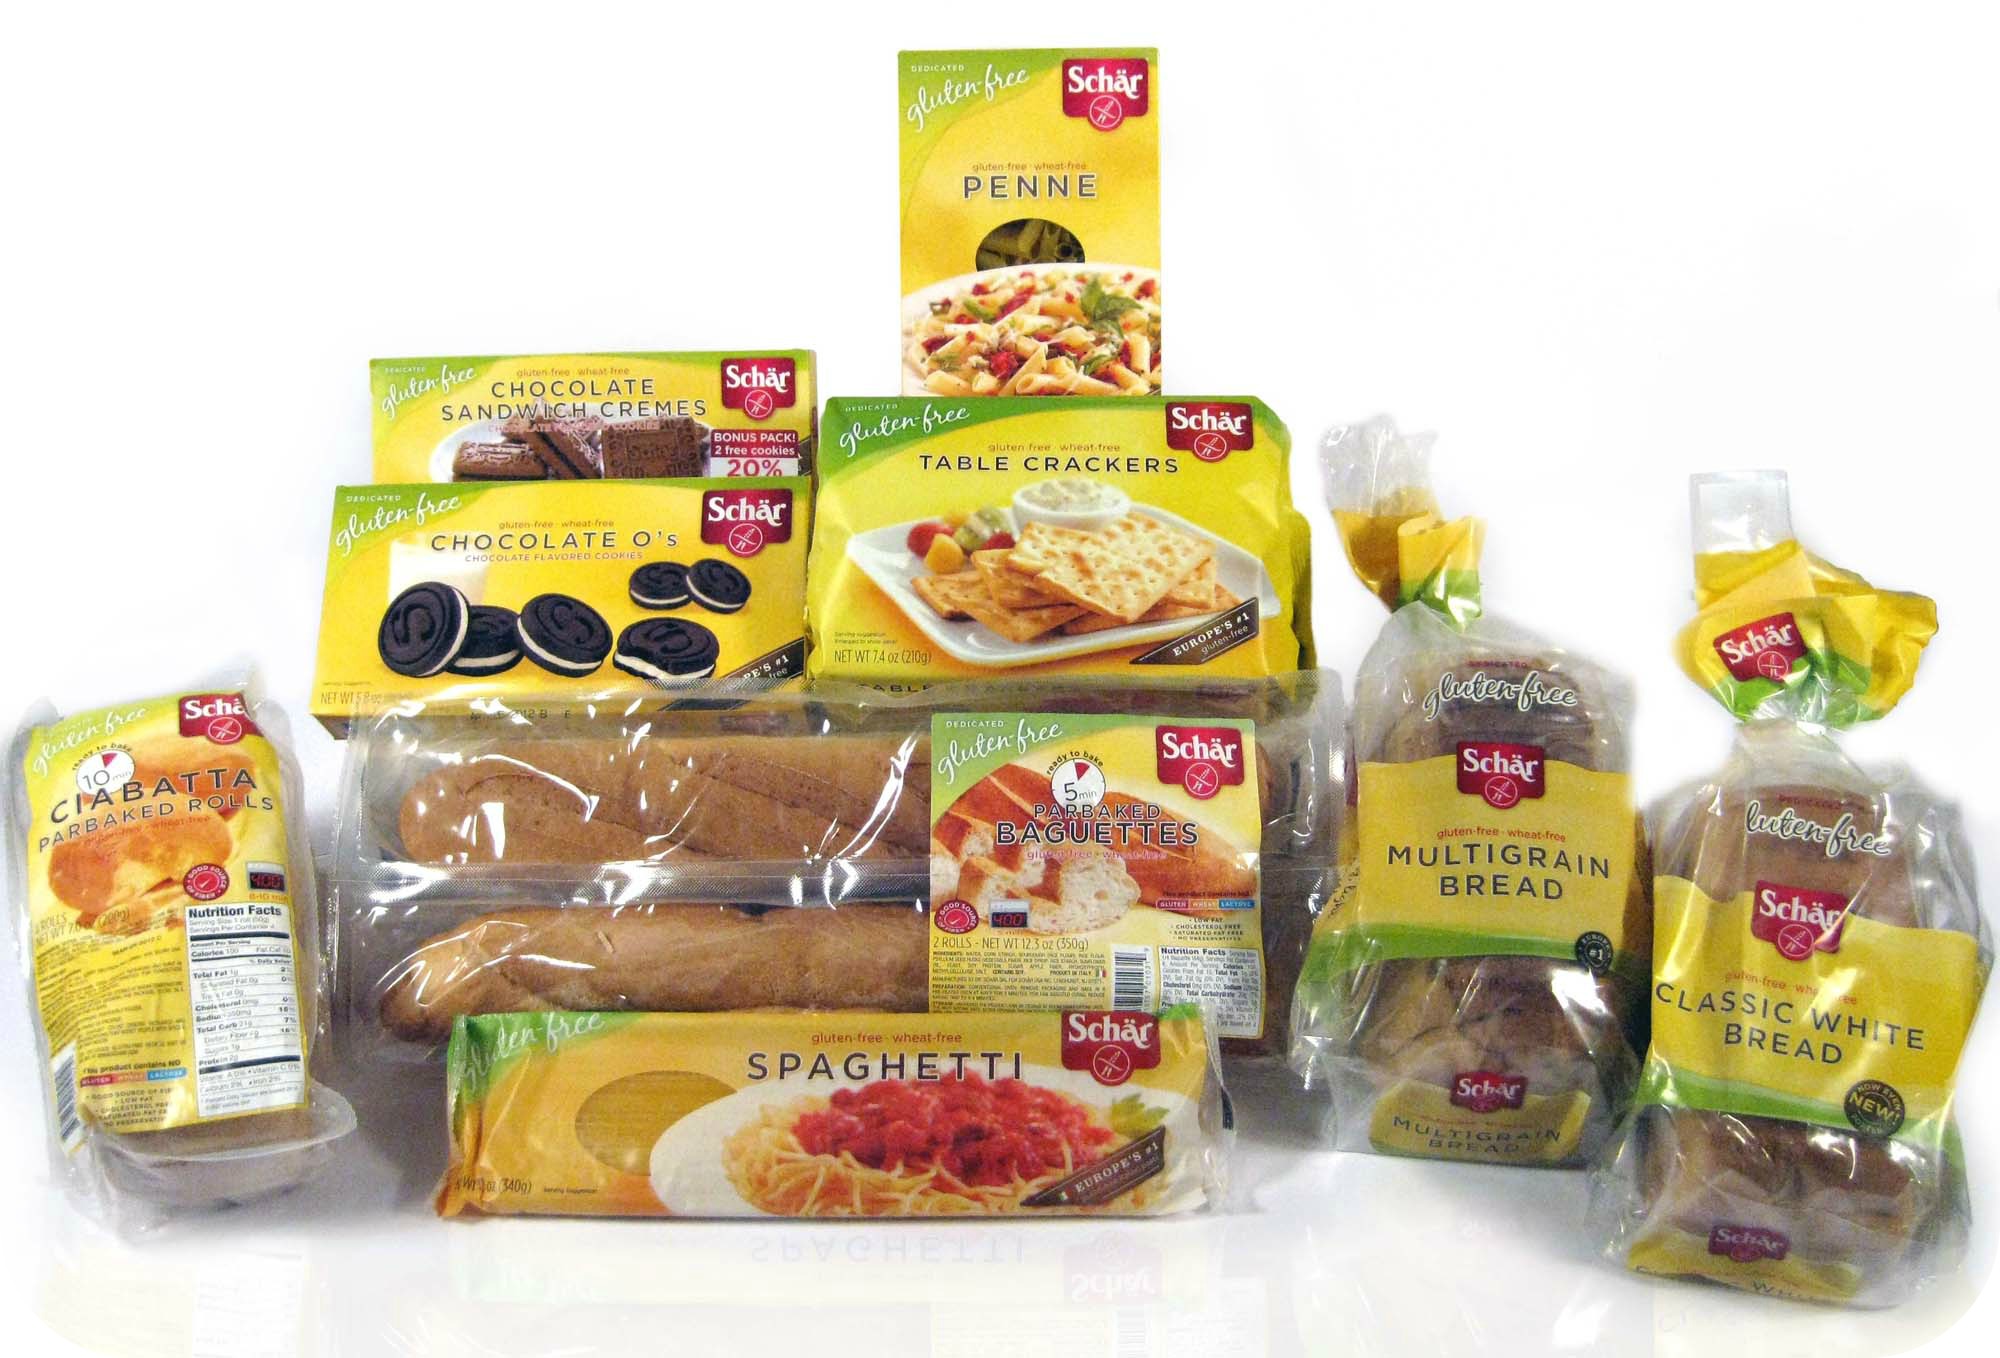 hot-3-off-schar-gluten-free-products-coupon-free-money-maker-at